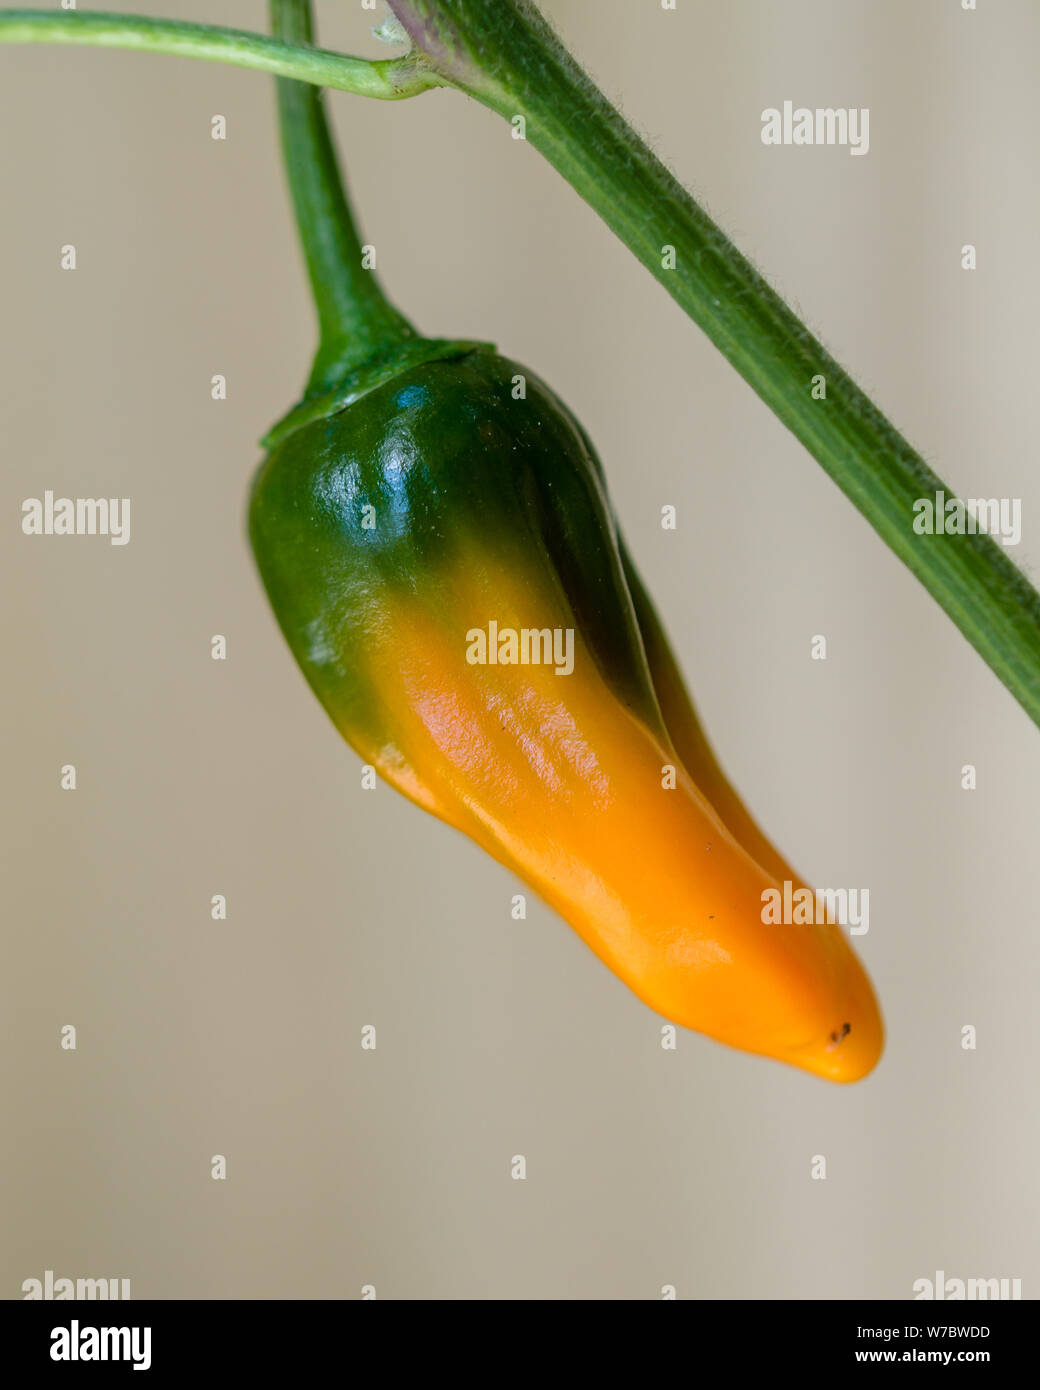 A chili fruit that is about to ripen. Stock Photo